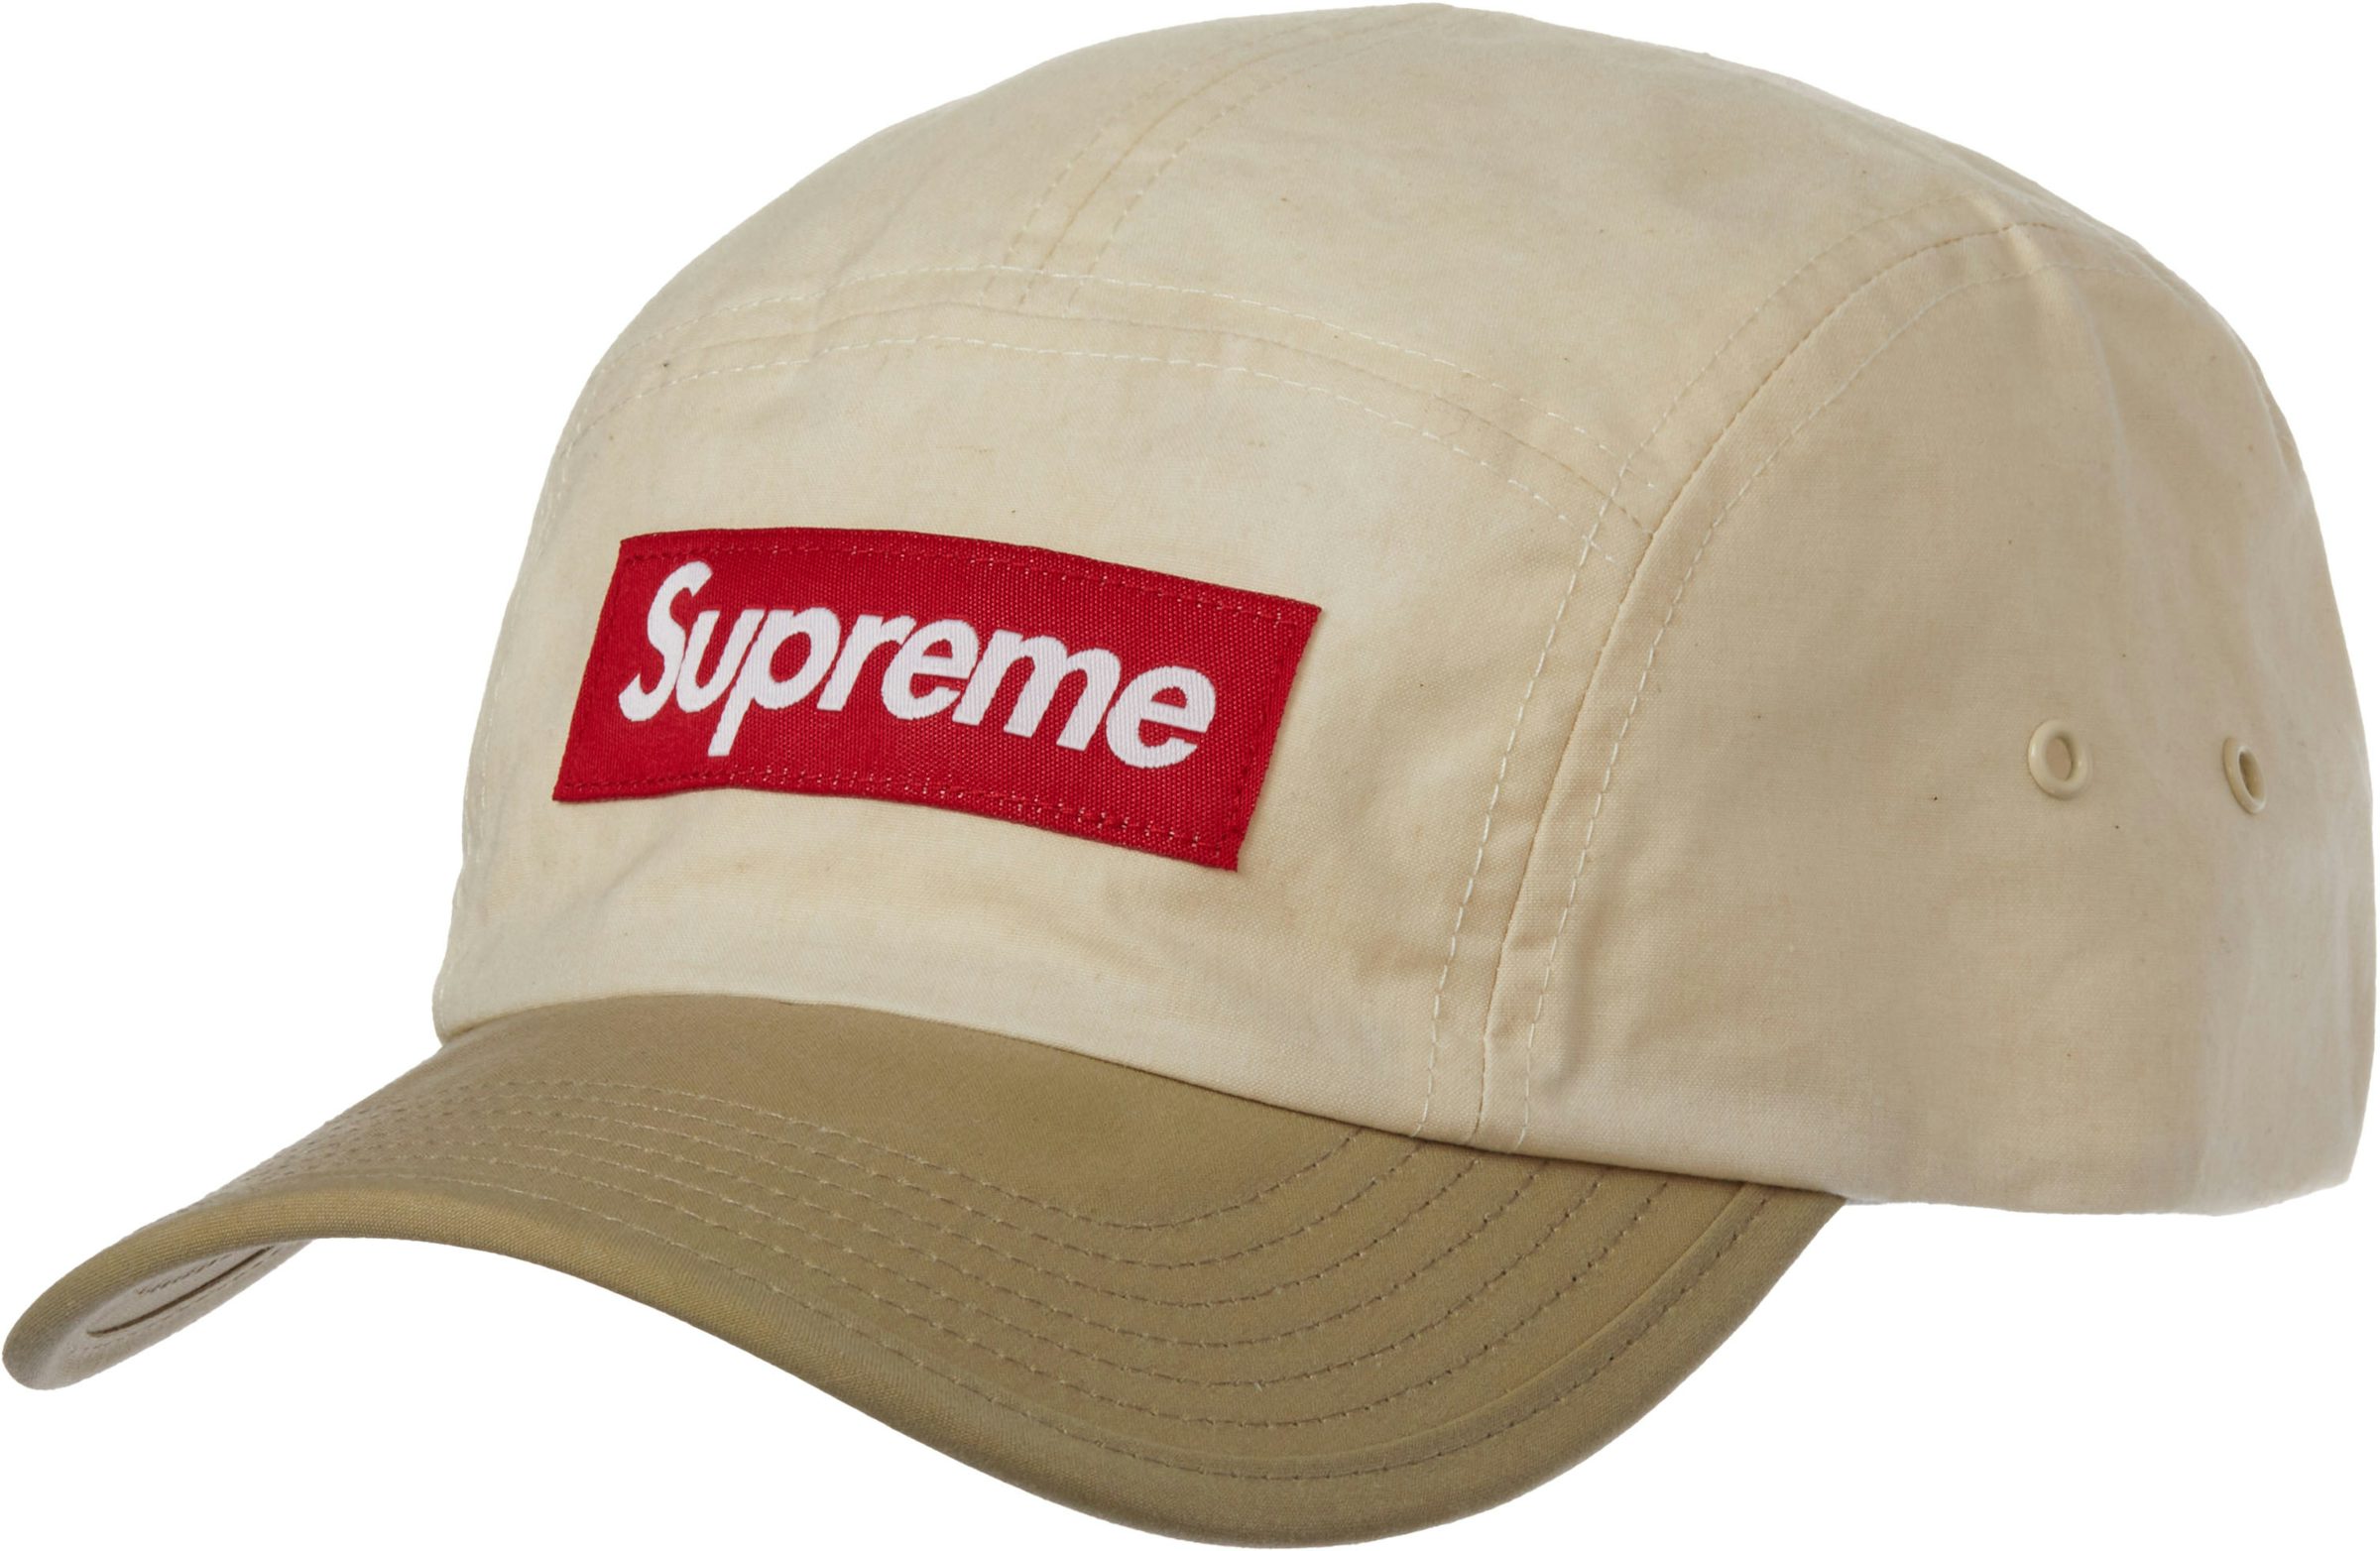 Supreme Waxed Cotton Camp Cap Halley Stevensons waxed cotton